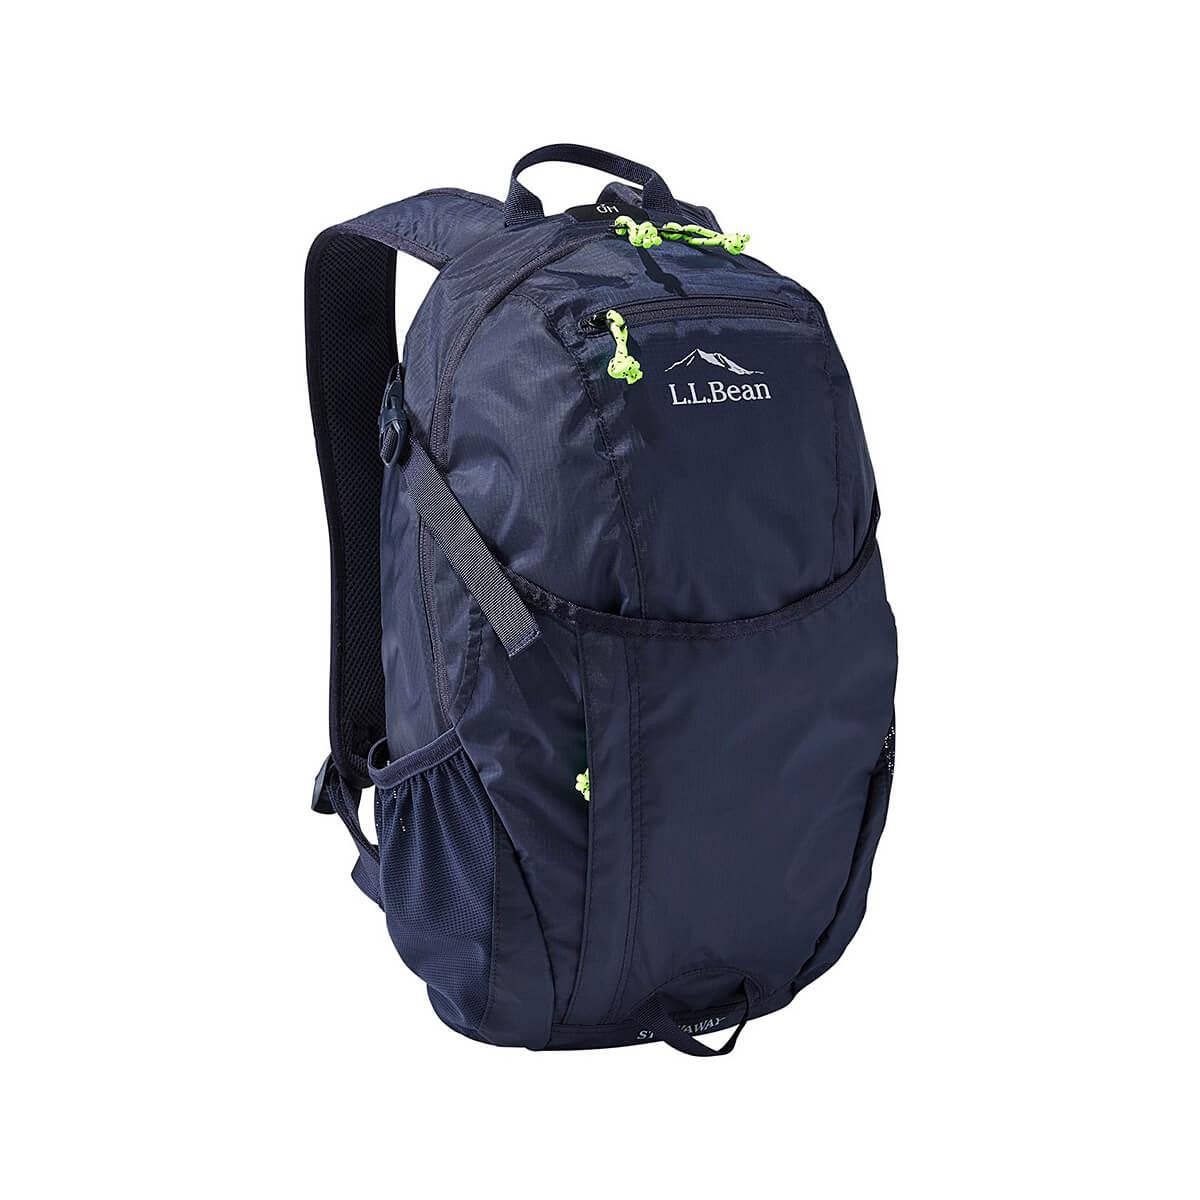 L.L.Bean Deluxe Backpack  Free Shipping at Academy